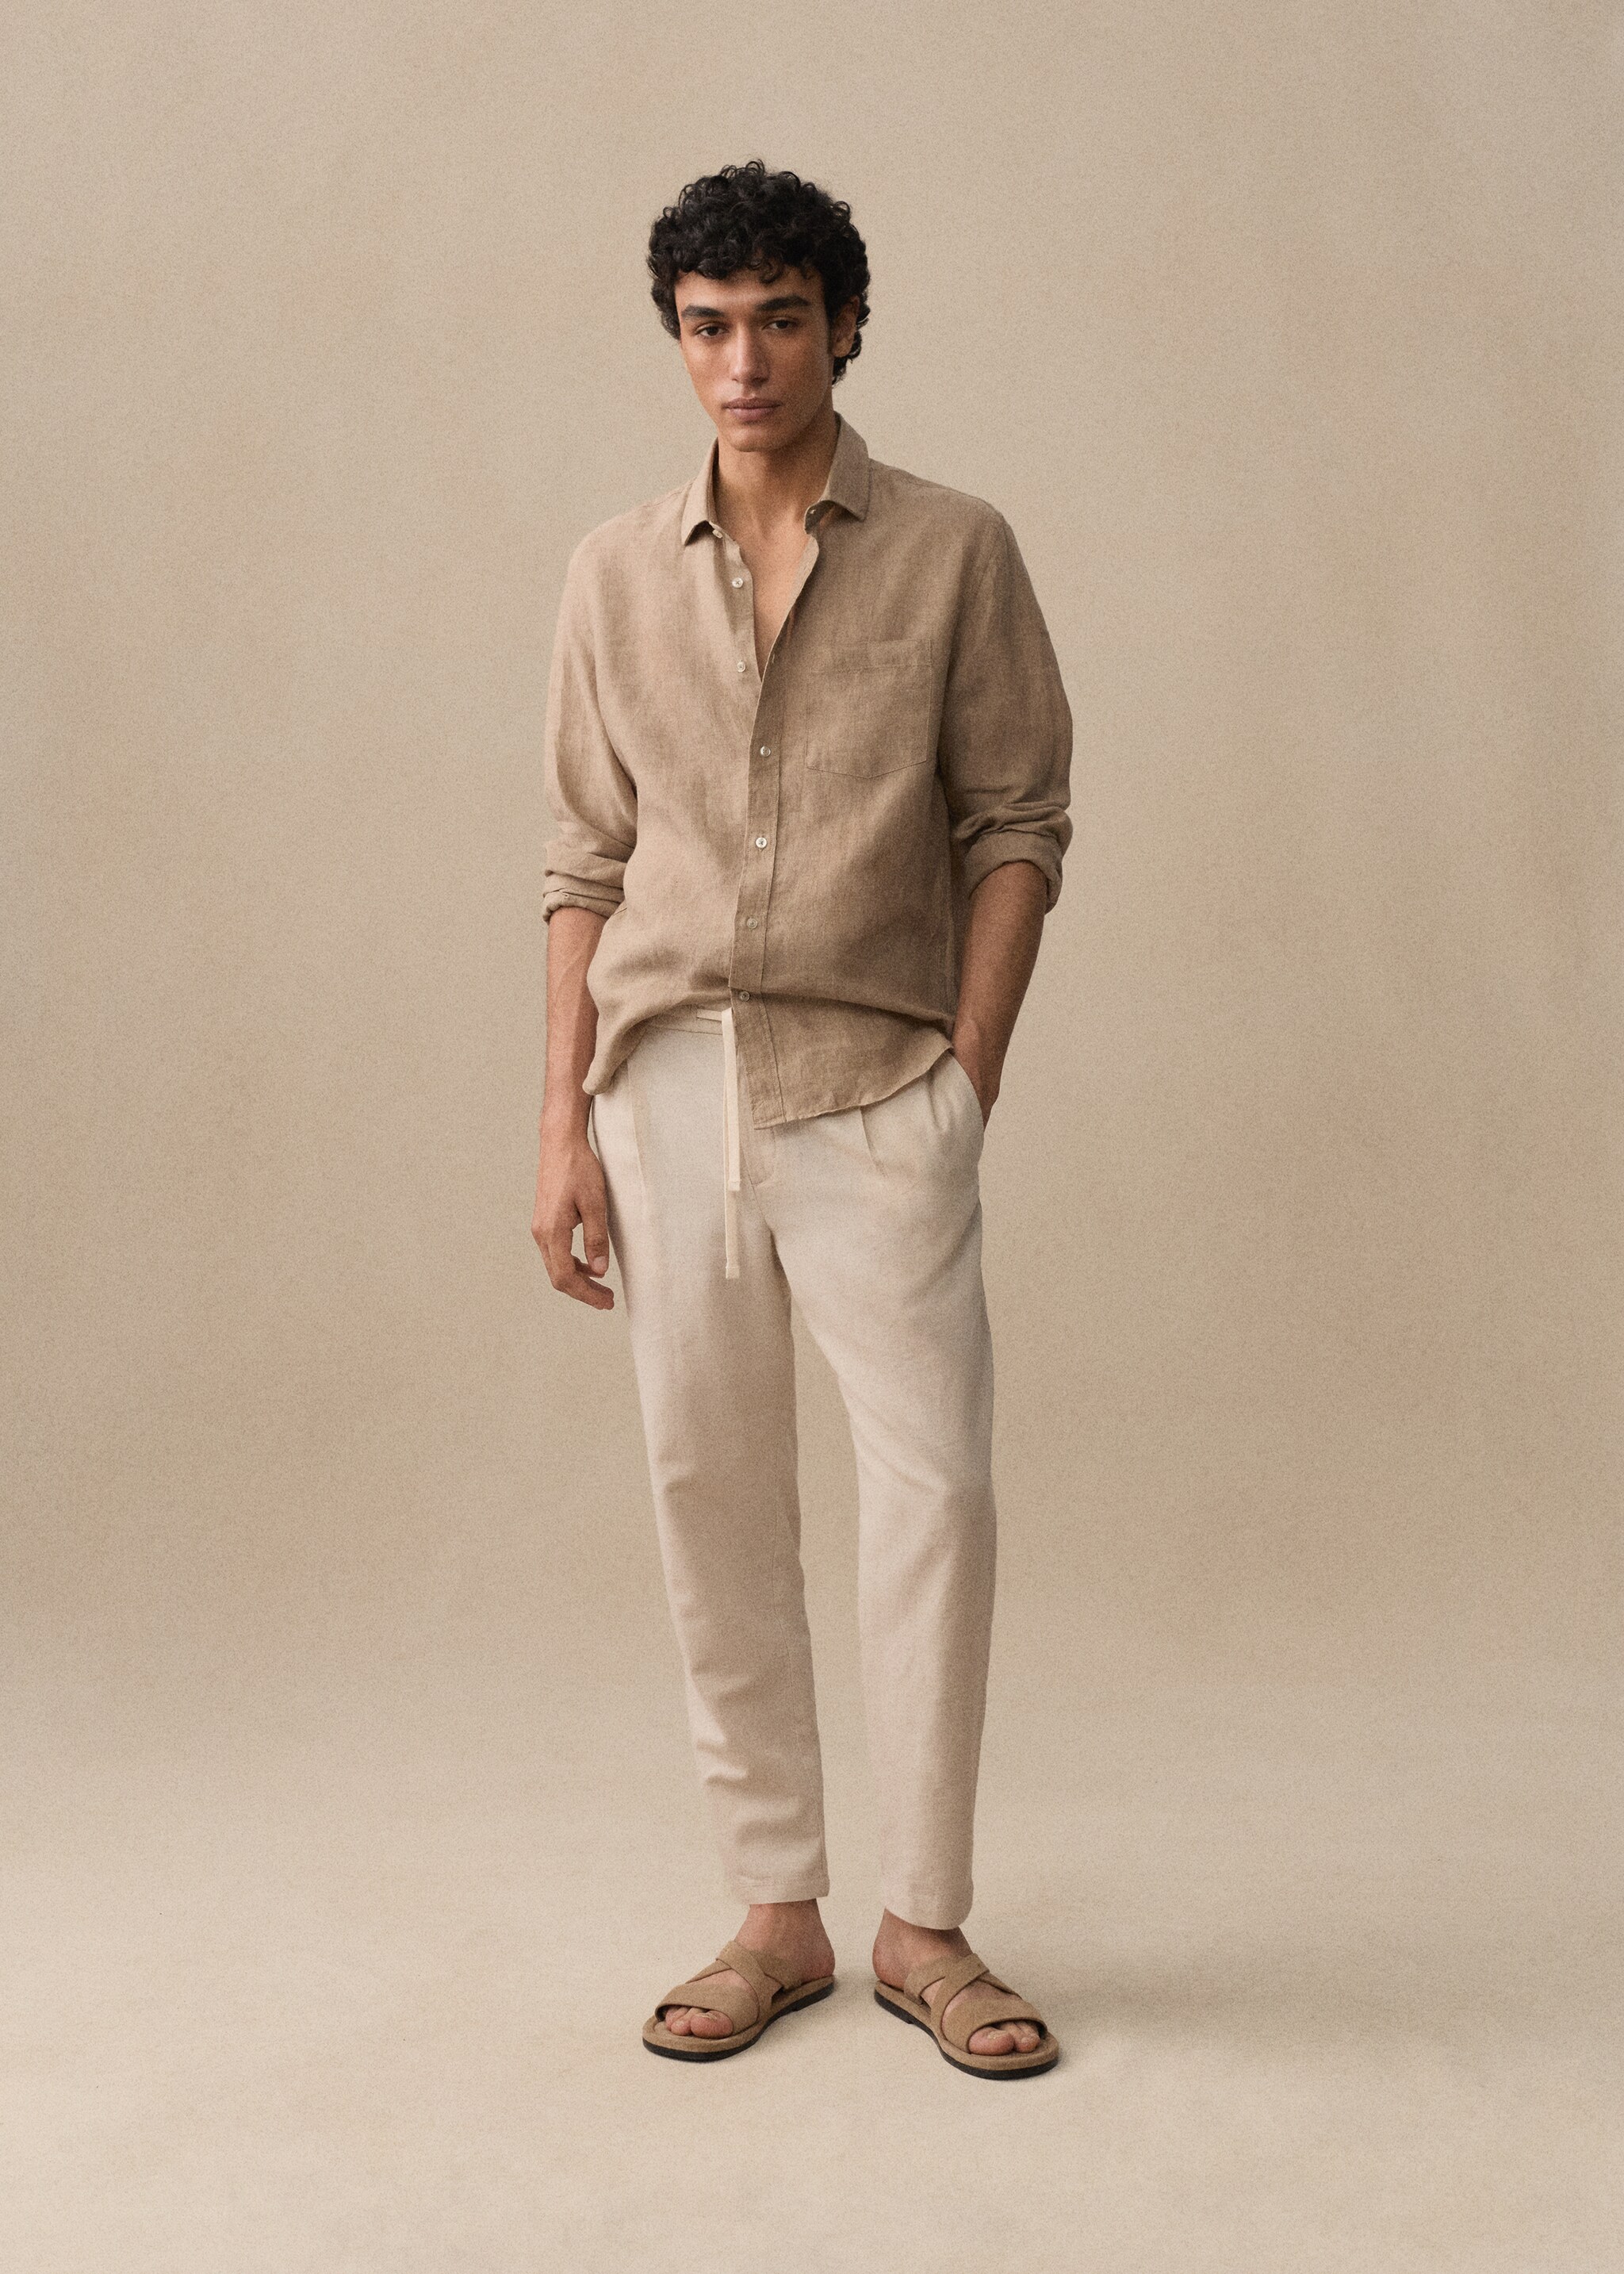 Classic fit 100% linen shirt - Details of the article 5